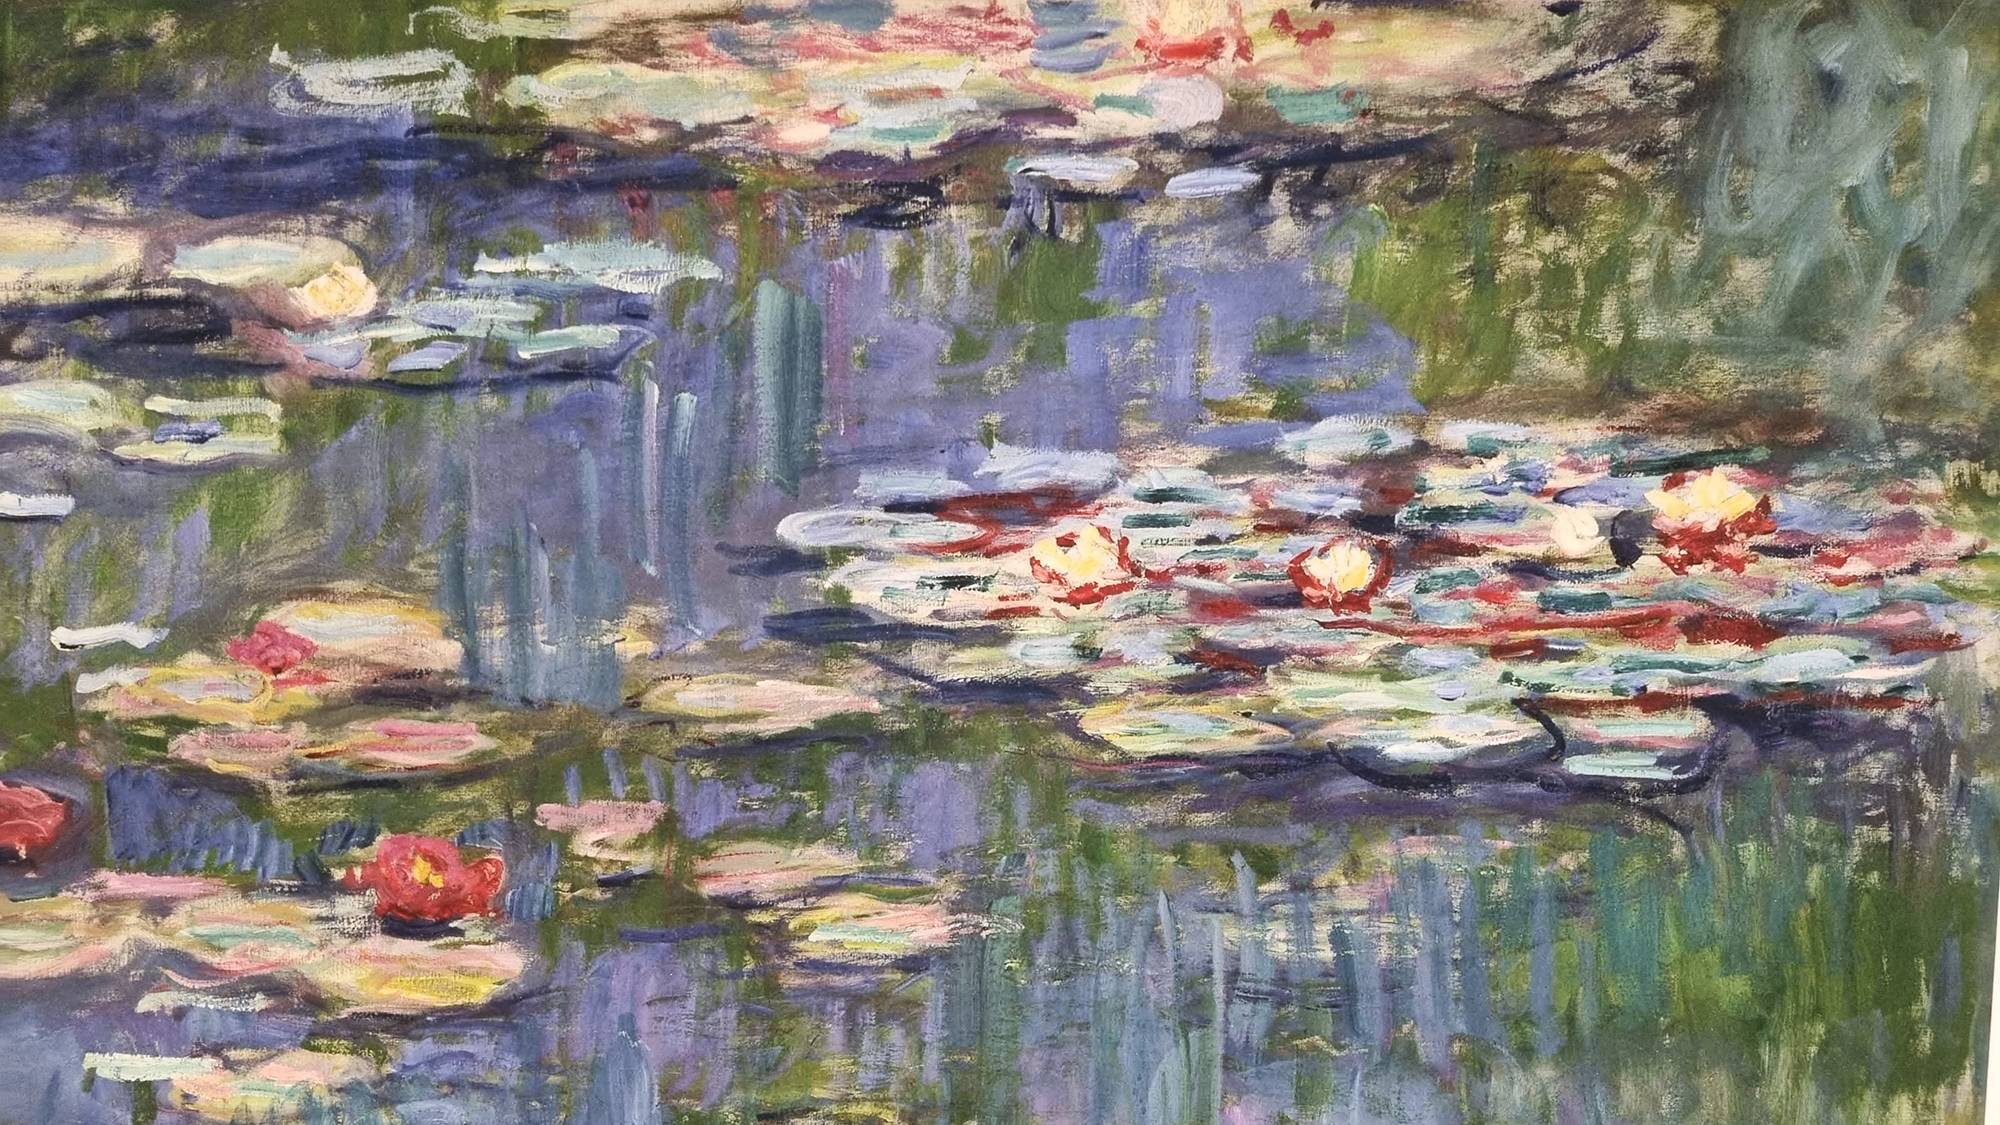 Claude Monet Limited Edition "Water Lilies, 1916" One of only 95 Published. - Image 7 of 7